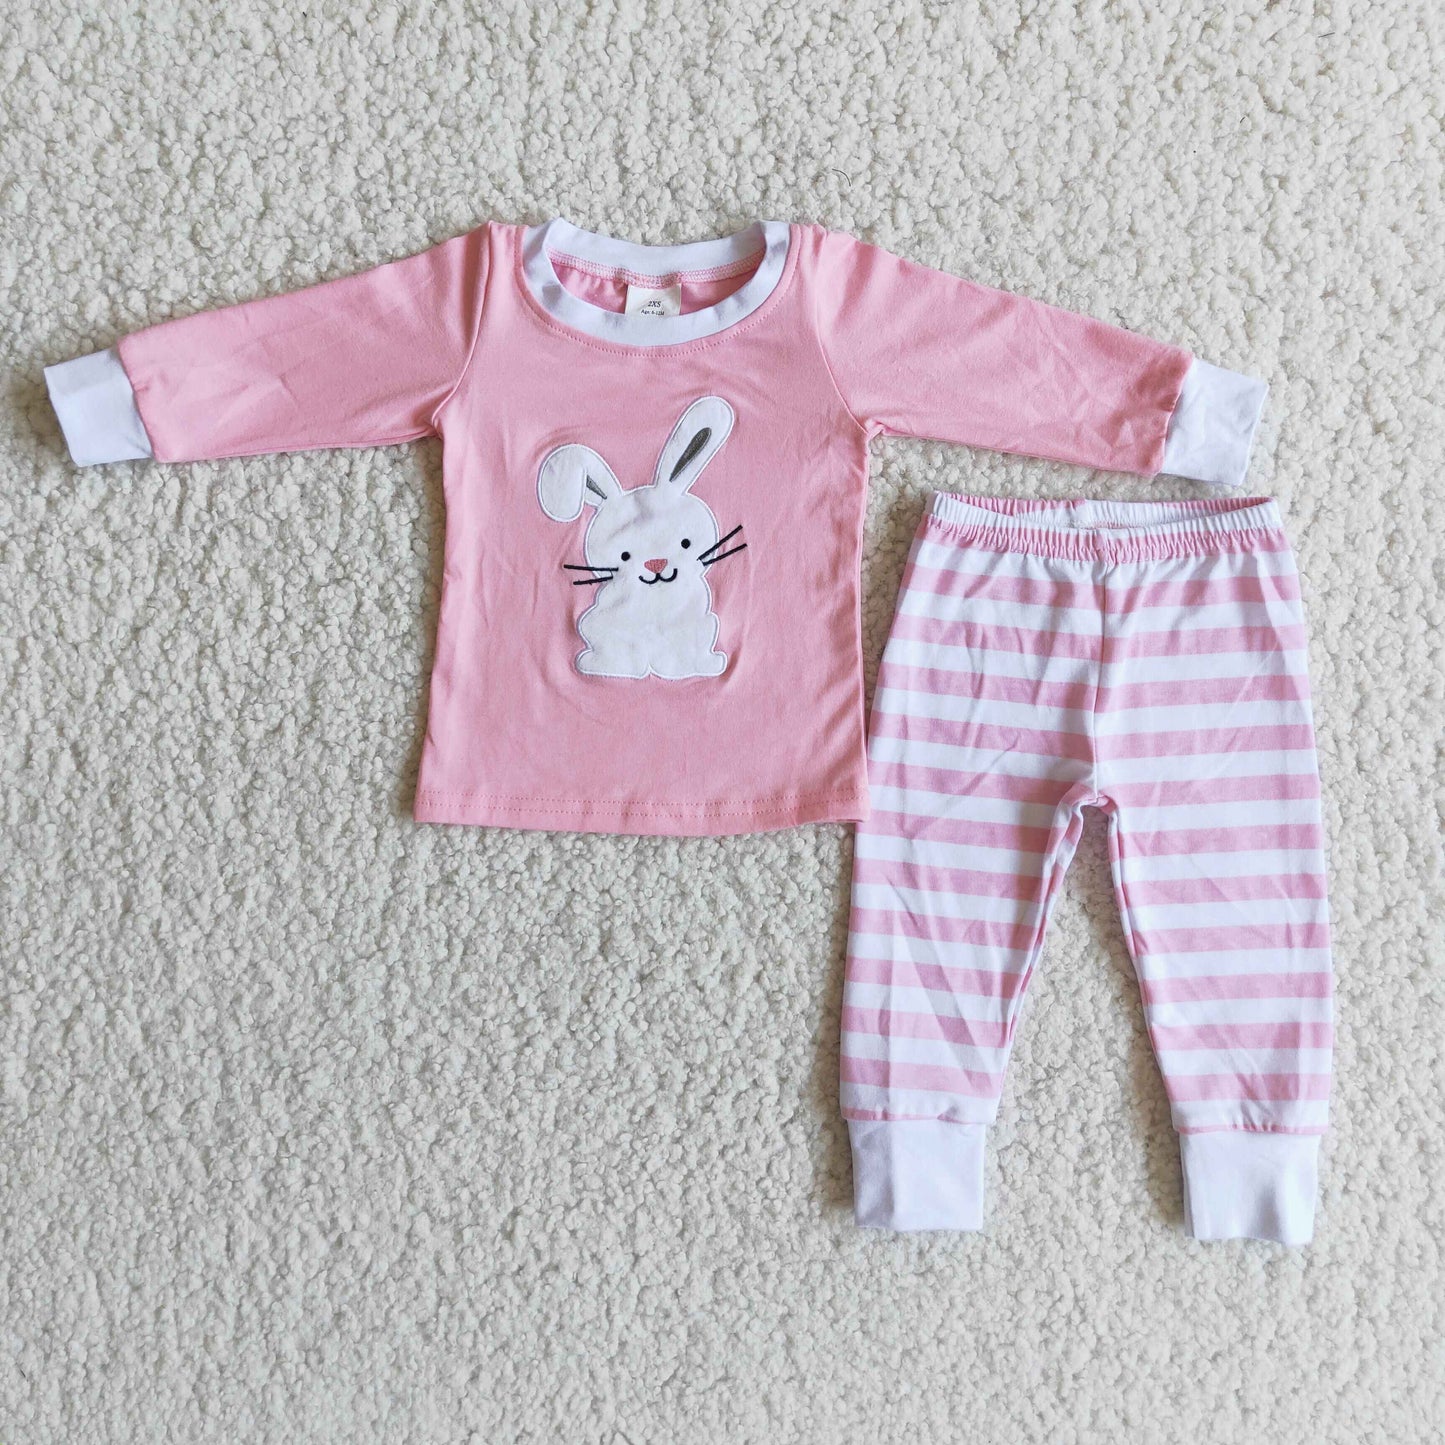 6 B8-25  kids Easter clothes set long sleeve top with pants outfit